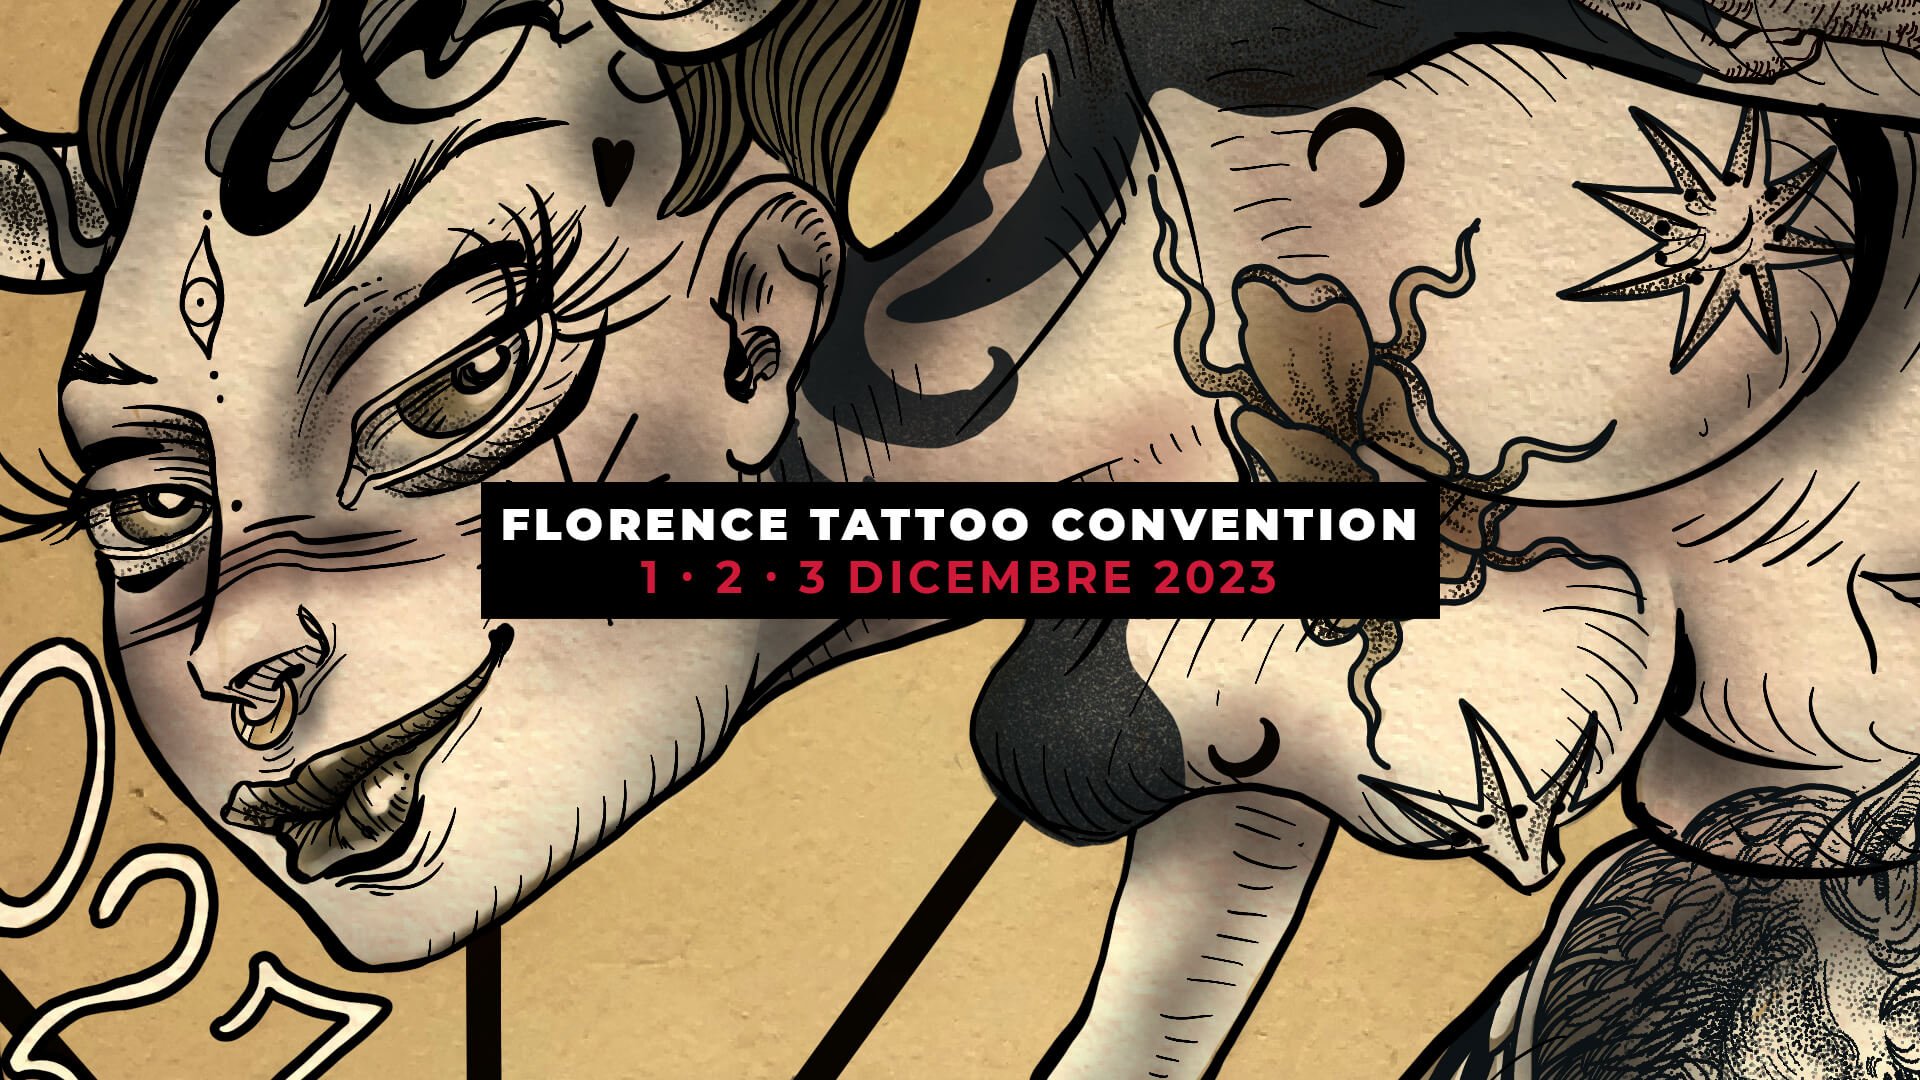 Ink Unleashed: Florence Tattoo Convention 2023 Beckons!